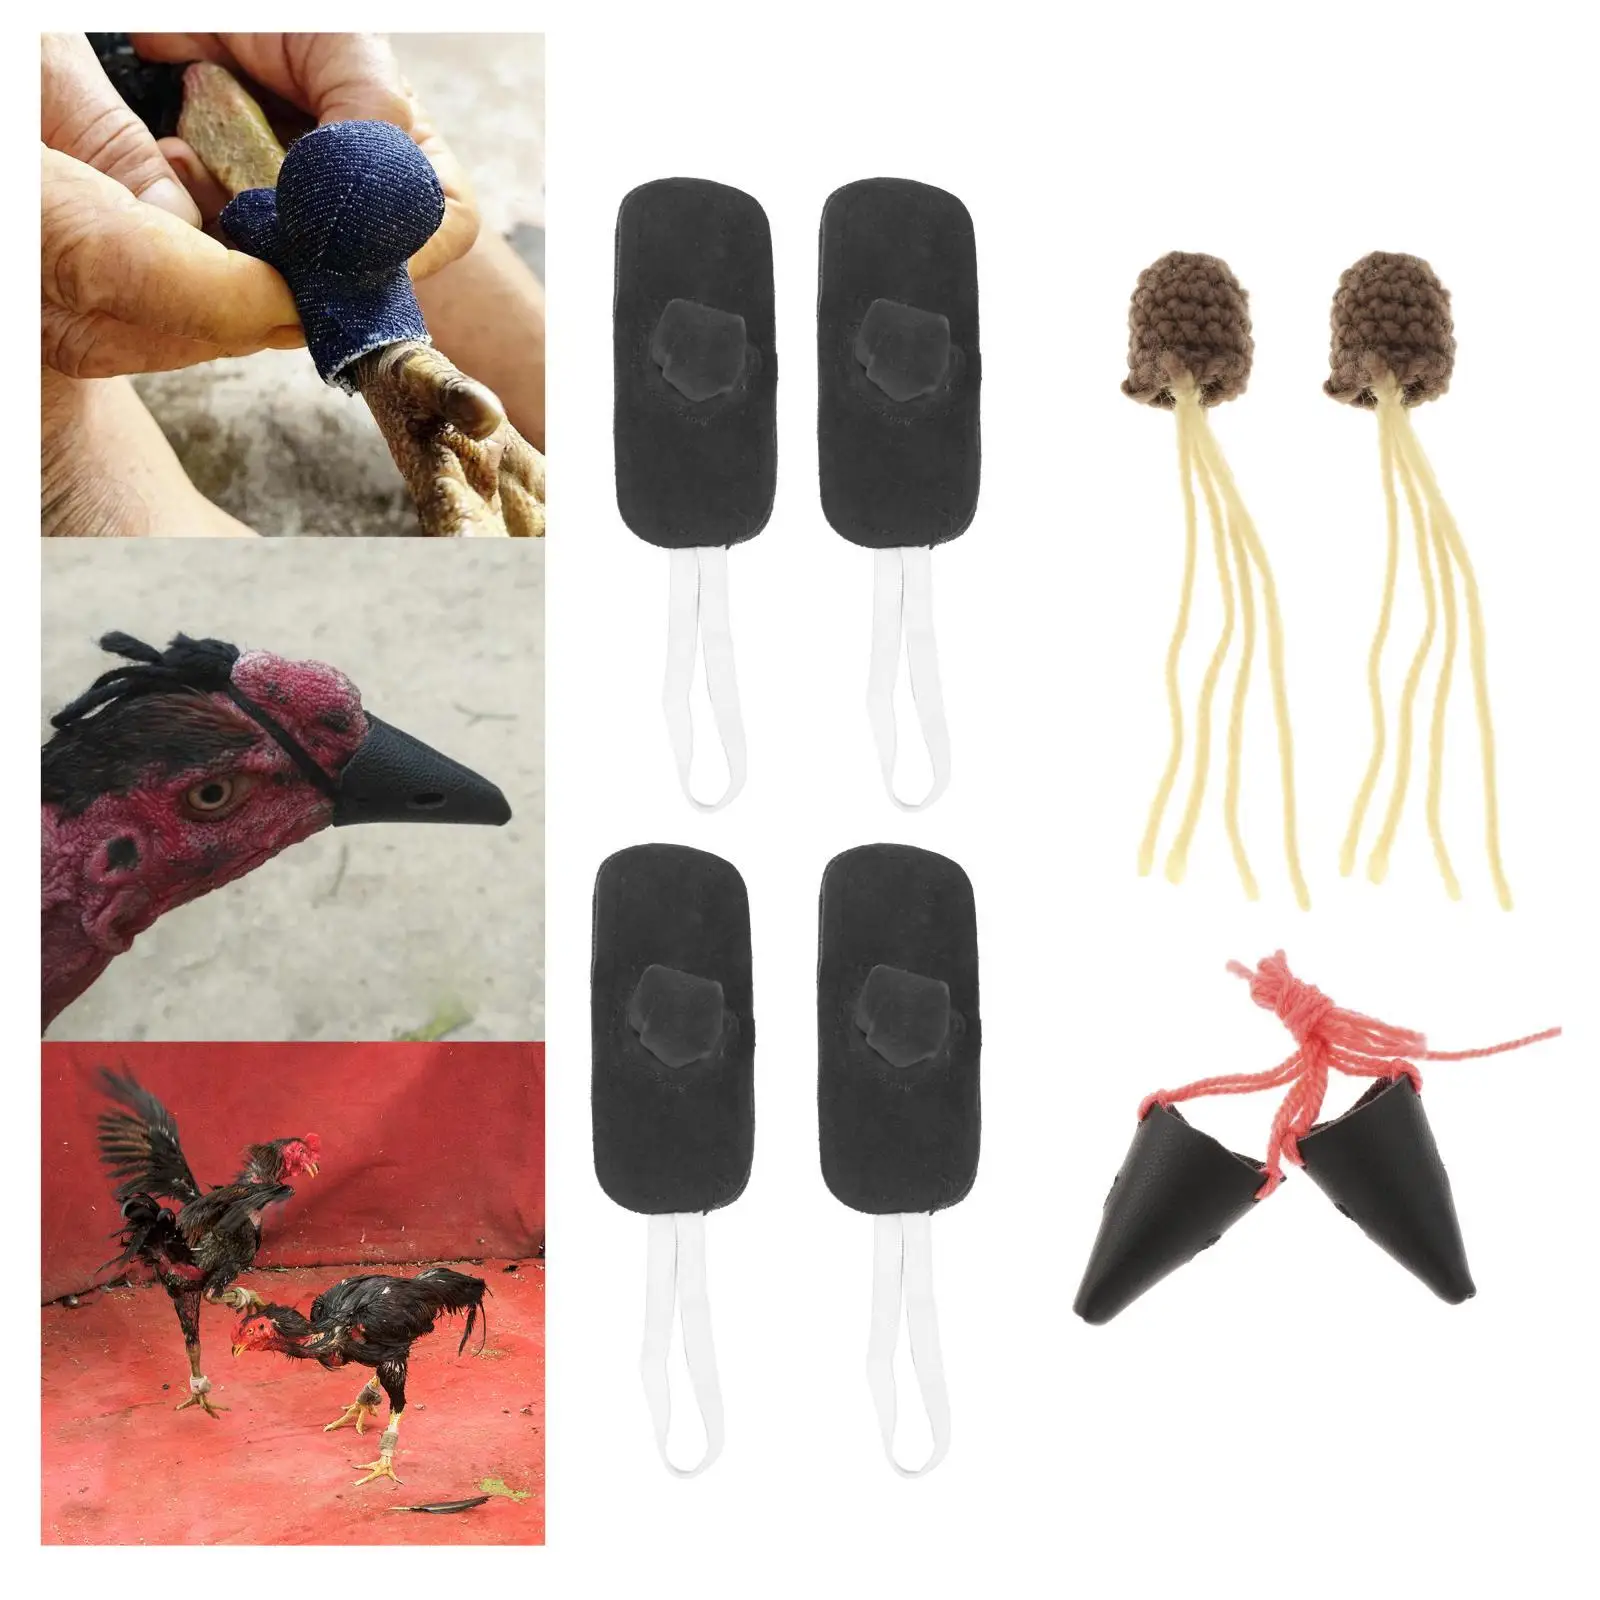 2 Set Fighting Foot Cover W/ Mouth Cover Safety Protection Supplies Gamefowl Chicken Mitt Durable Cockfighting Foot Cover